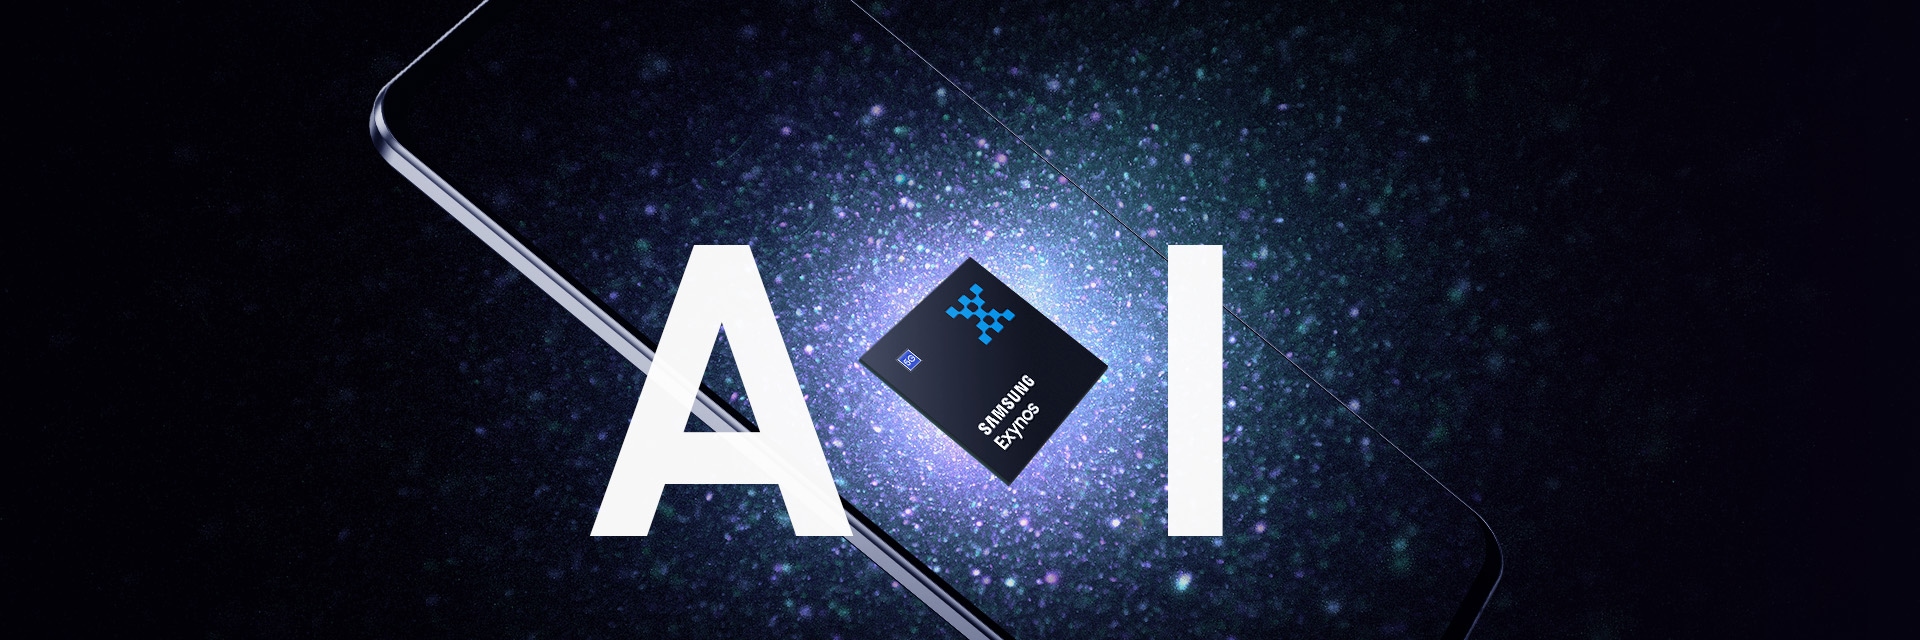 An image of Exynos processor over a wide net that symbolizes neural network